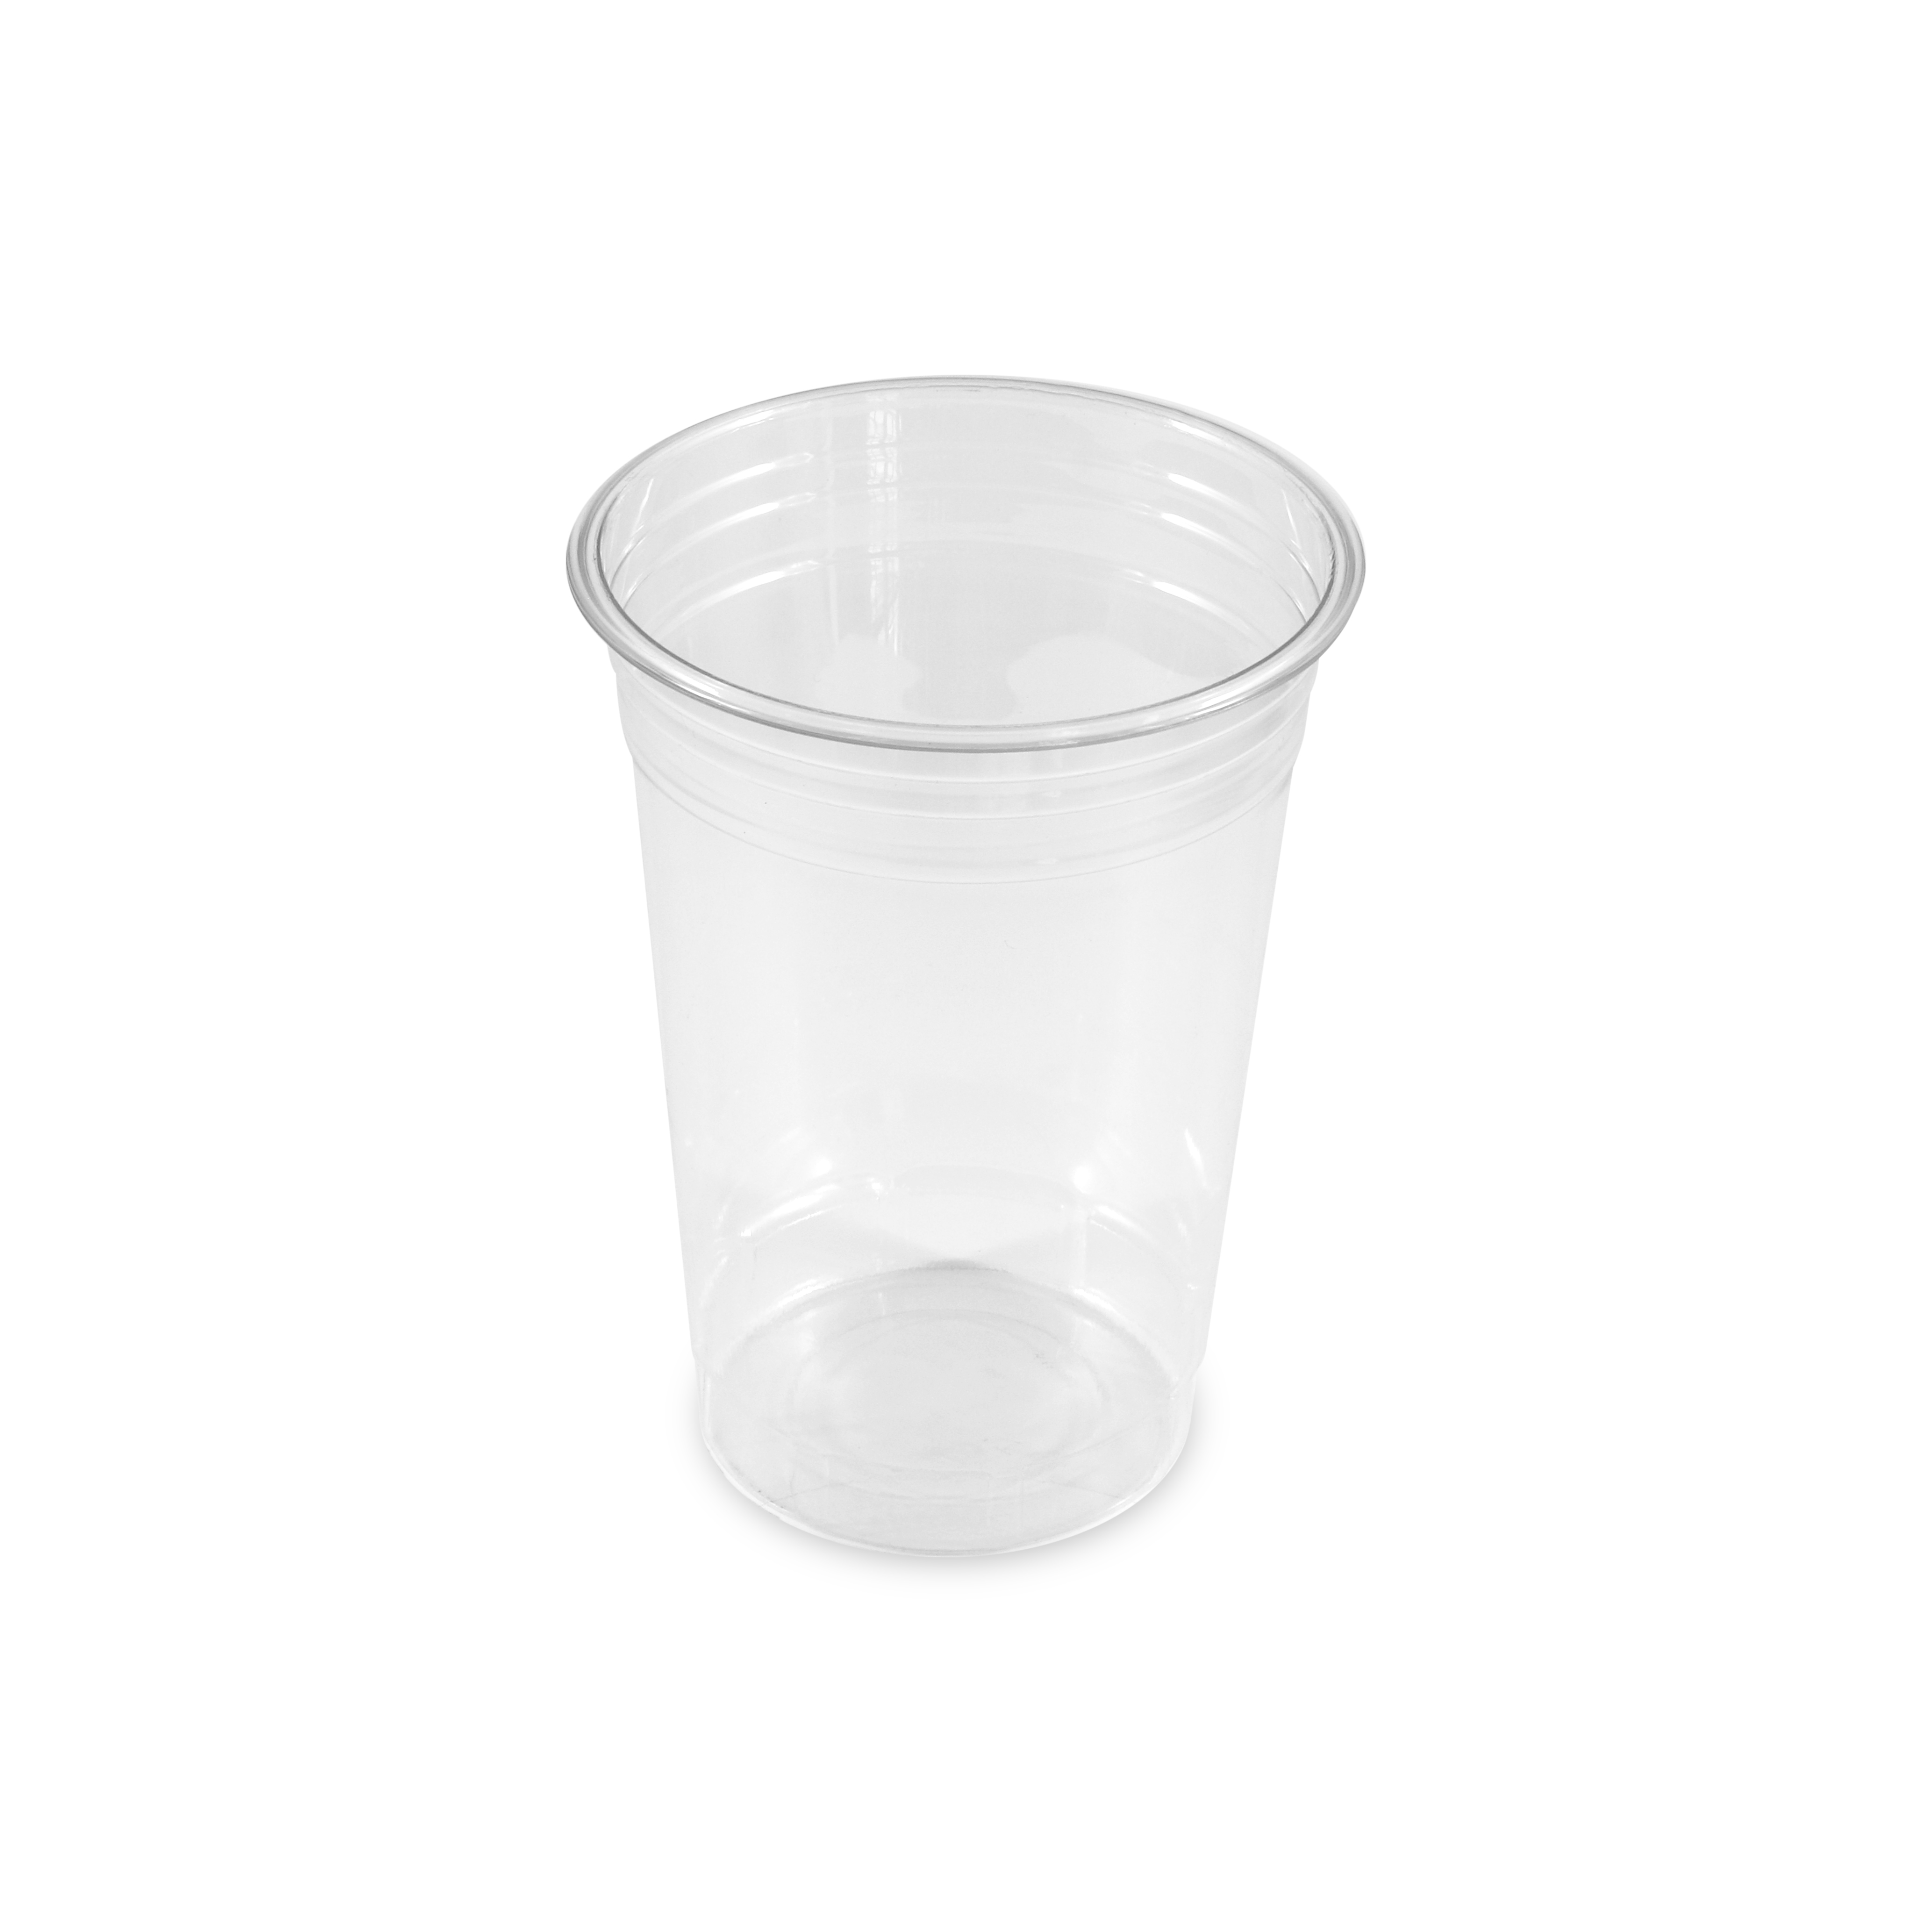 https://www.berryglobal.com/-/media/Berry/Images/Products/Berry-Global/PET-Drinking-Cup-13662336/500ml_pet_drinking_cup_13662336.ashx